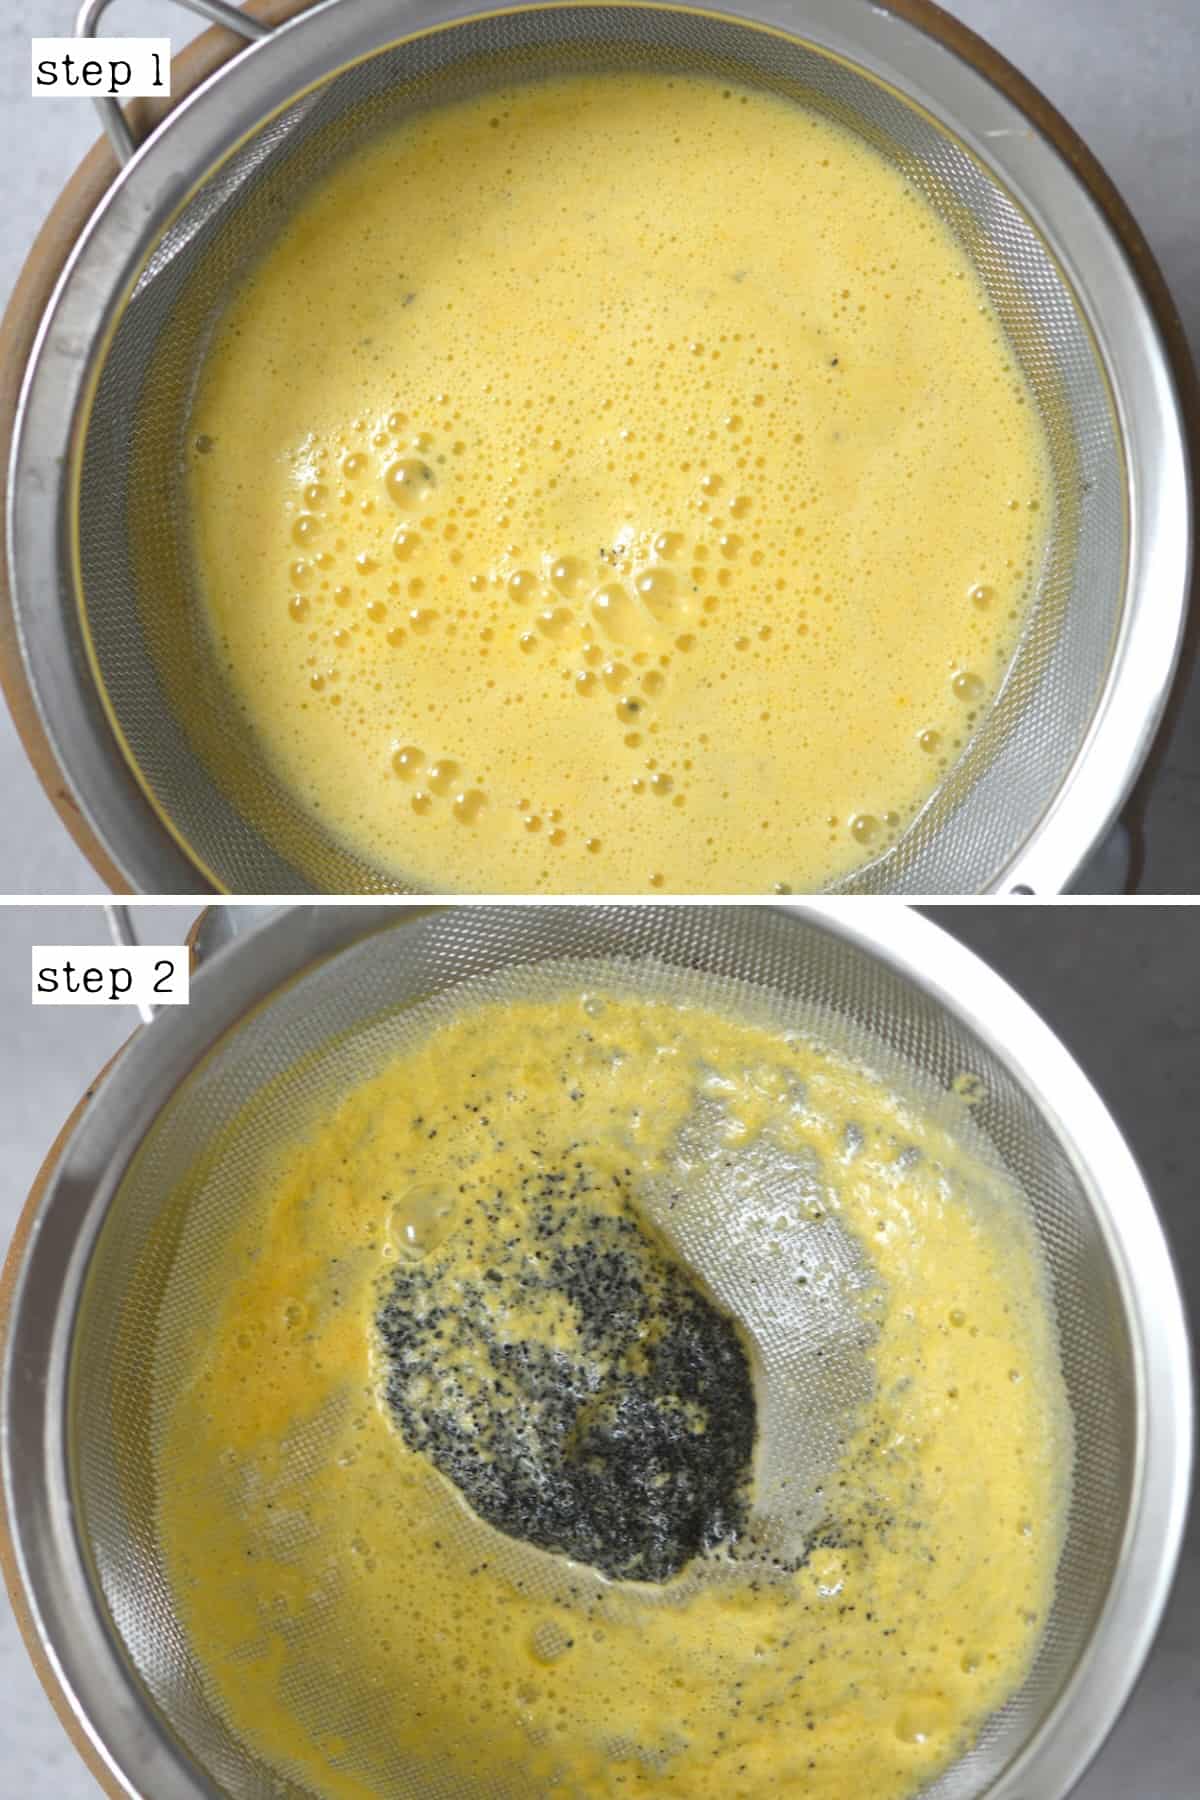 Steps for sieving passion fruit juice to remove the seeds